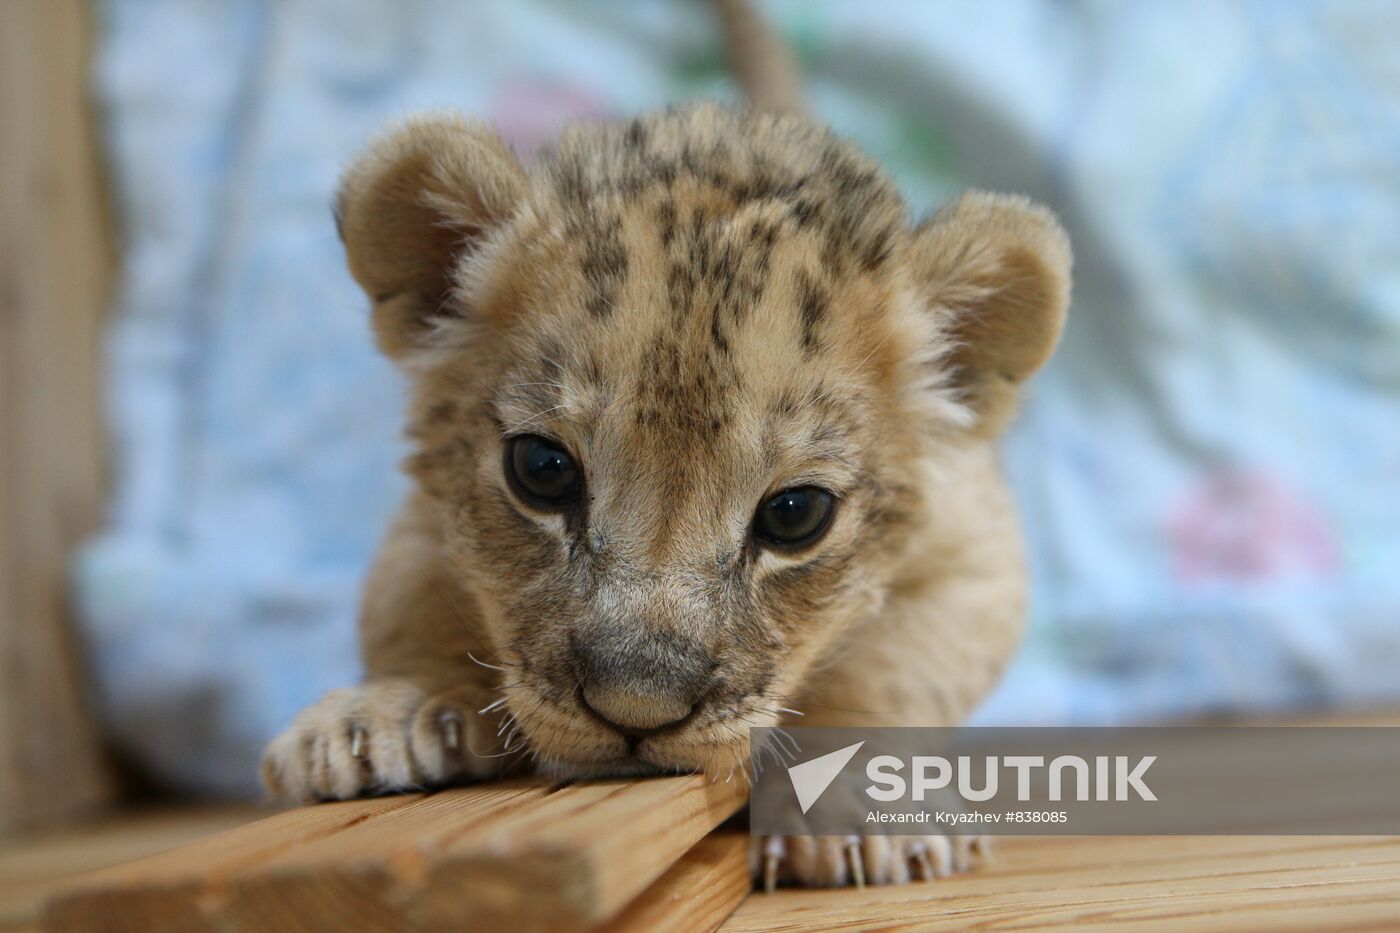 Lion cubs in Novosibirsk Zoo